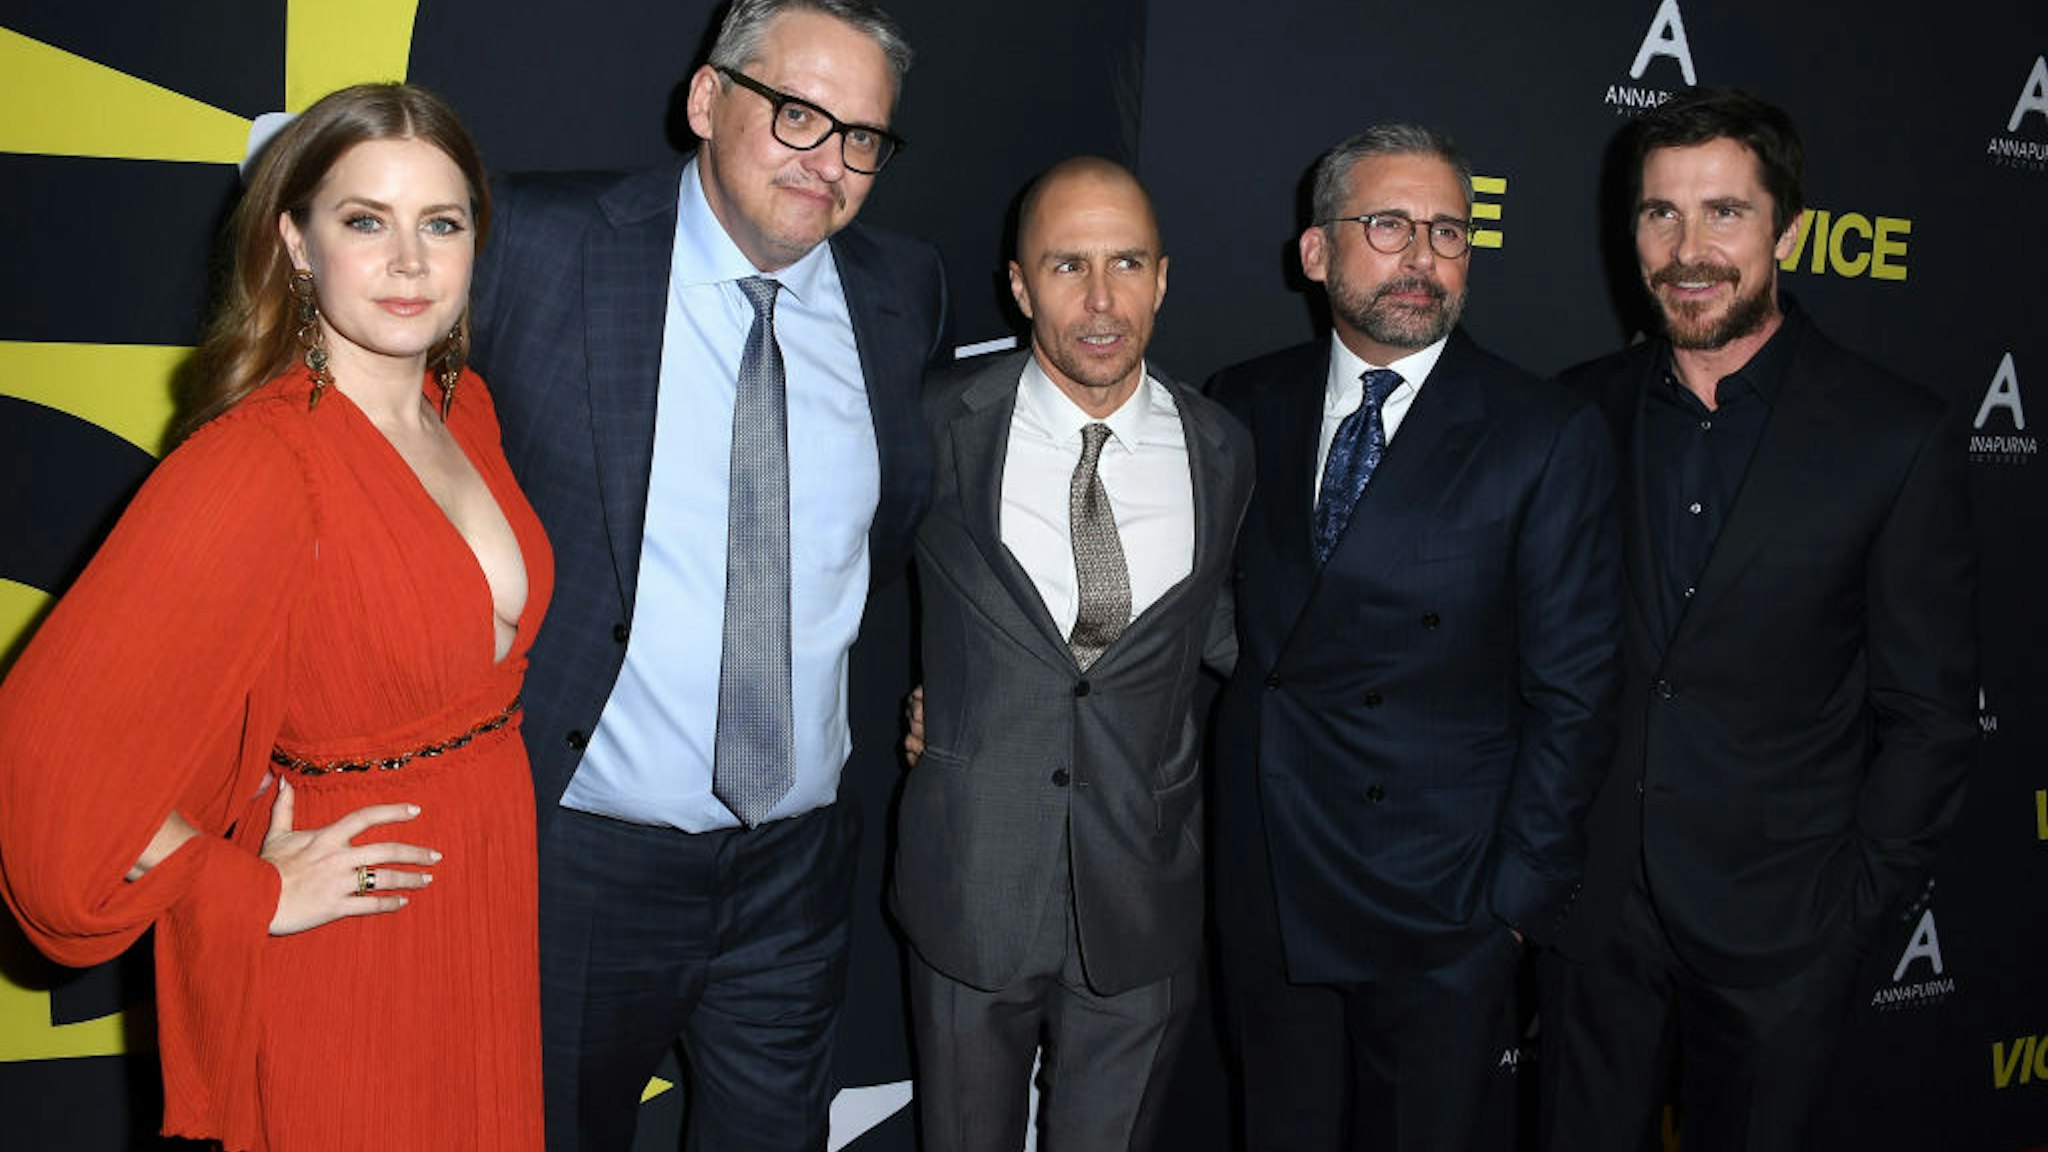 BEVERLY HILLS, CA - DECEMBER 11: (L-R) Amy Adams, Adam McKay, Sam Rockwell, Steve Carell and Christian Bale attend Annapurna Pictures, Gary Sanchez Productions and Plan B Entertainment's World Premiere of "Vice" at AMPAS Samuel Goldwyn Theater on December 11, 2018 in Beverly Hills, California. (Photo by Steve Granitz/WireImage)